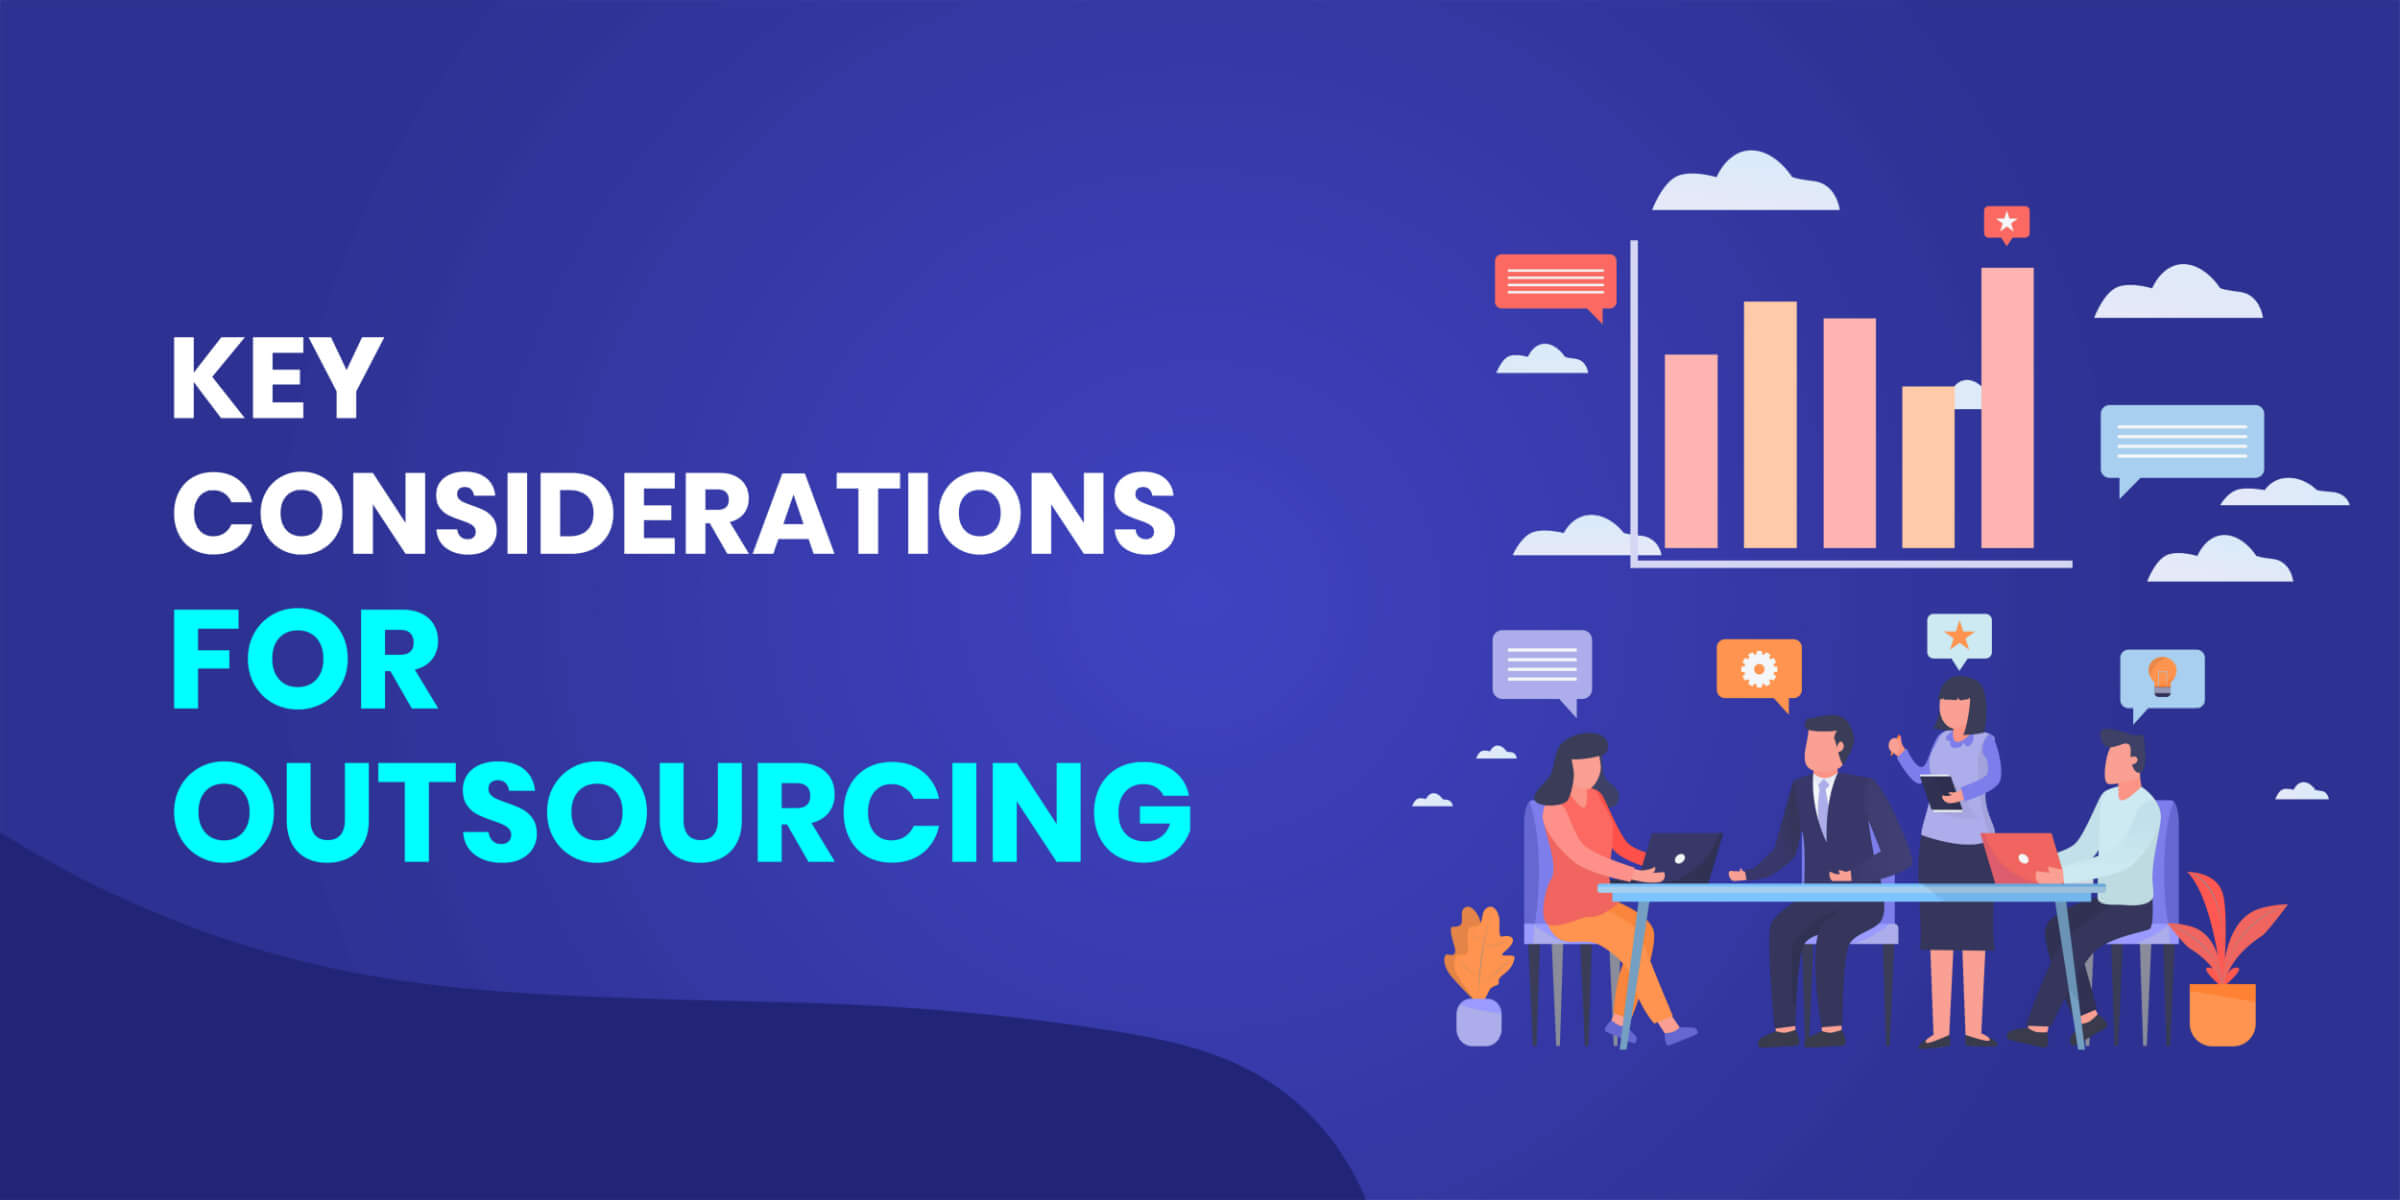 Key Considerations for Outsourcing